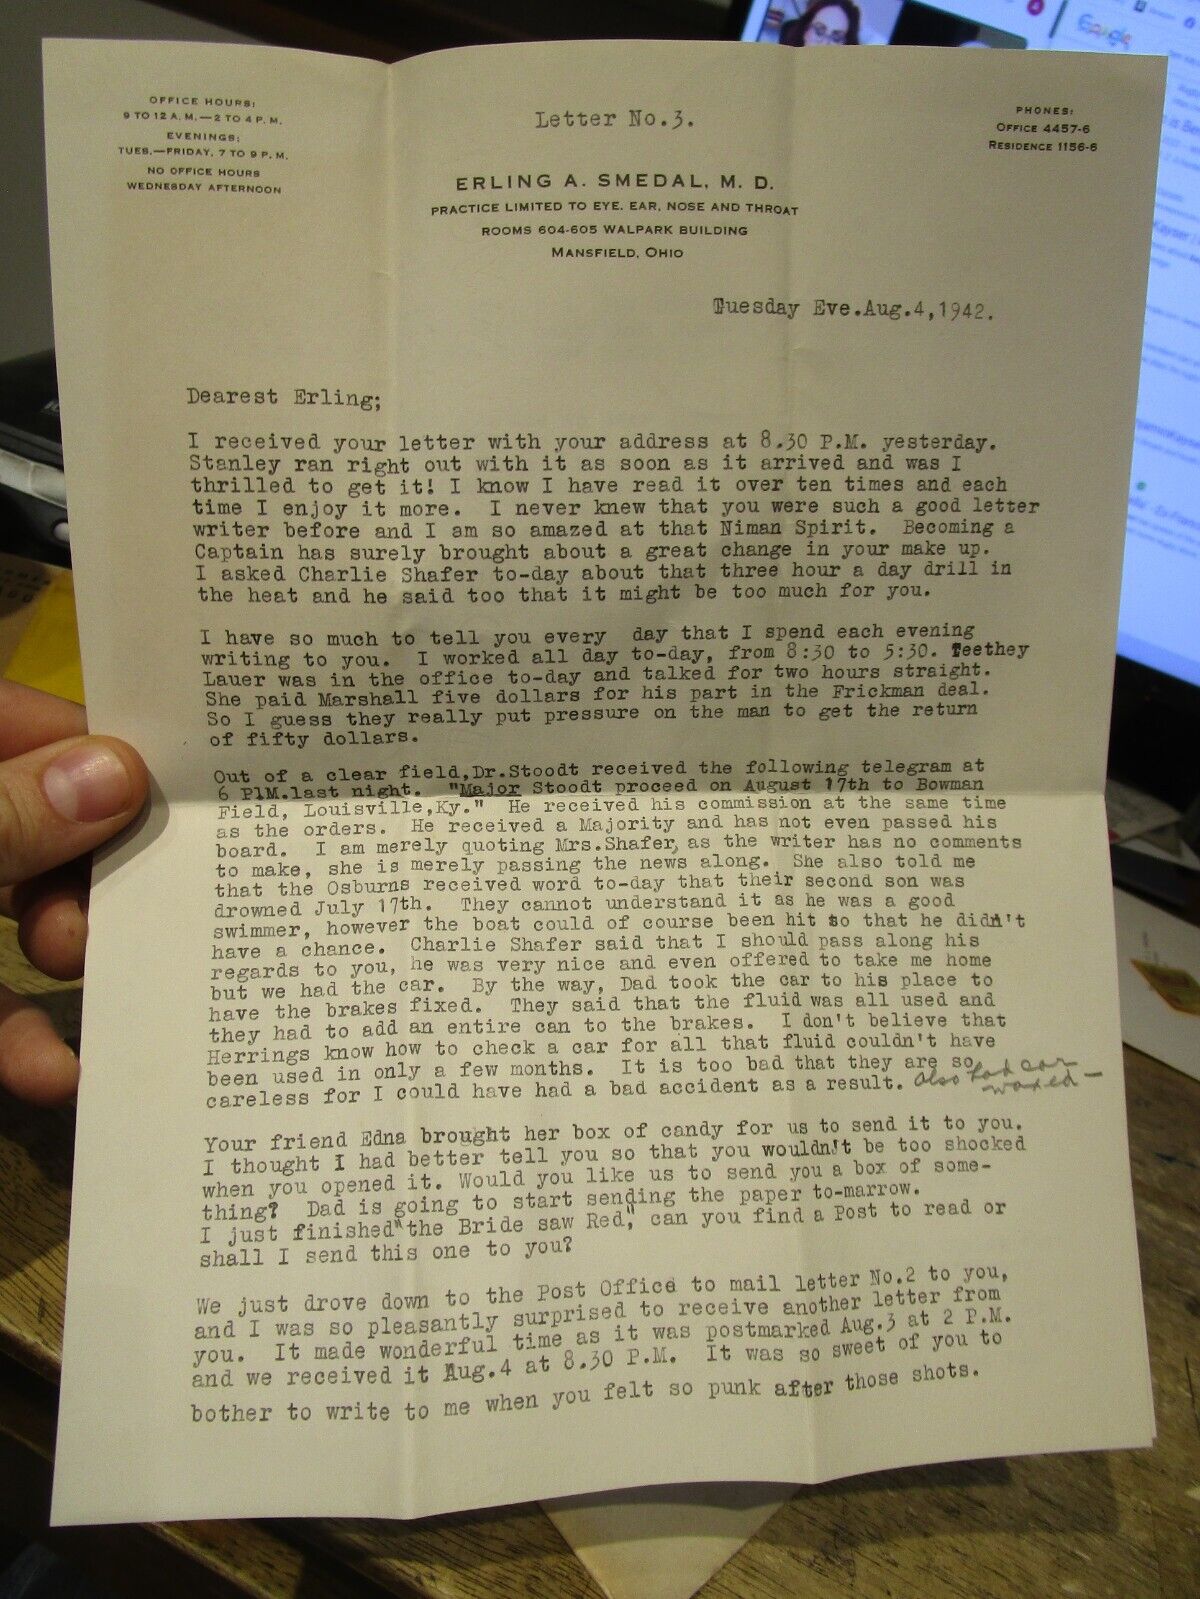 1942 Mansfield Ohio to Langley Field Hospital Virginia Dr. Erling Smedal Letter